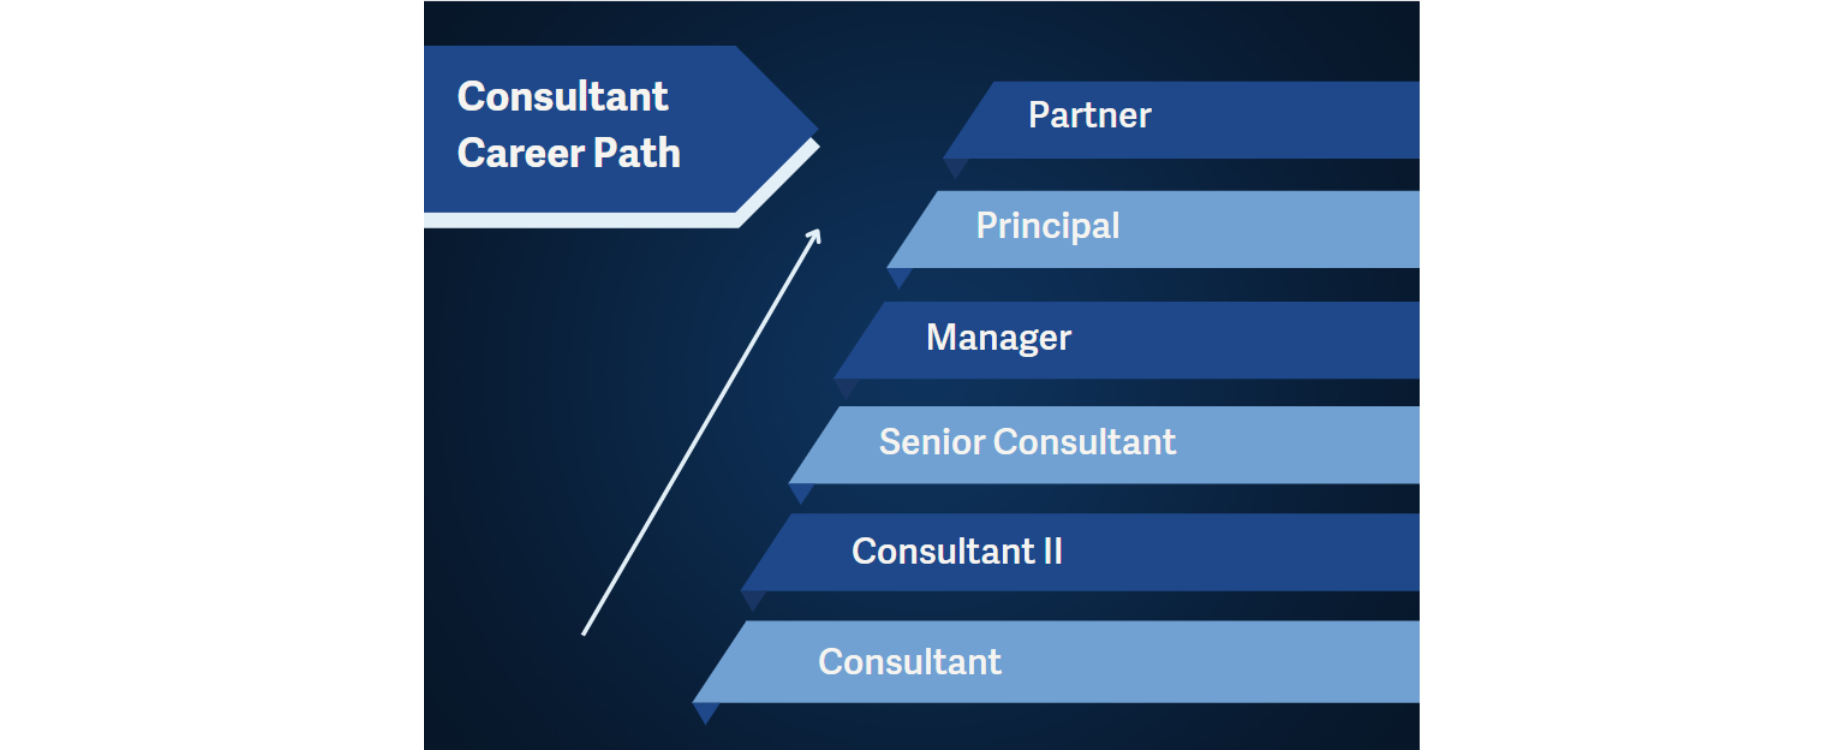 Consultant career path chart